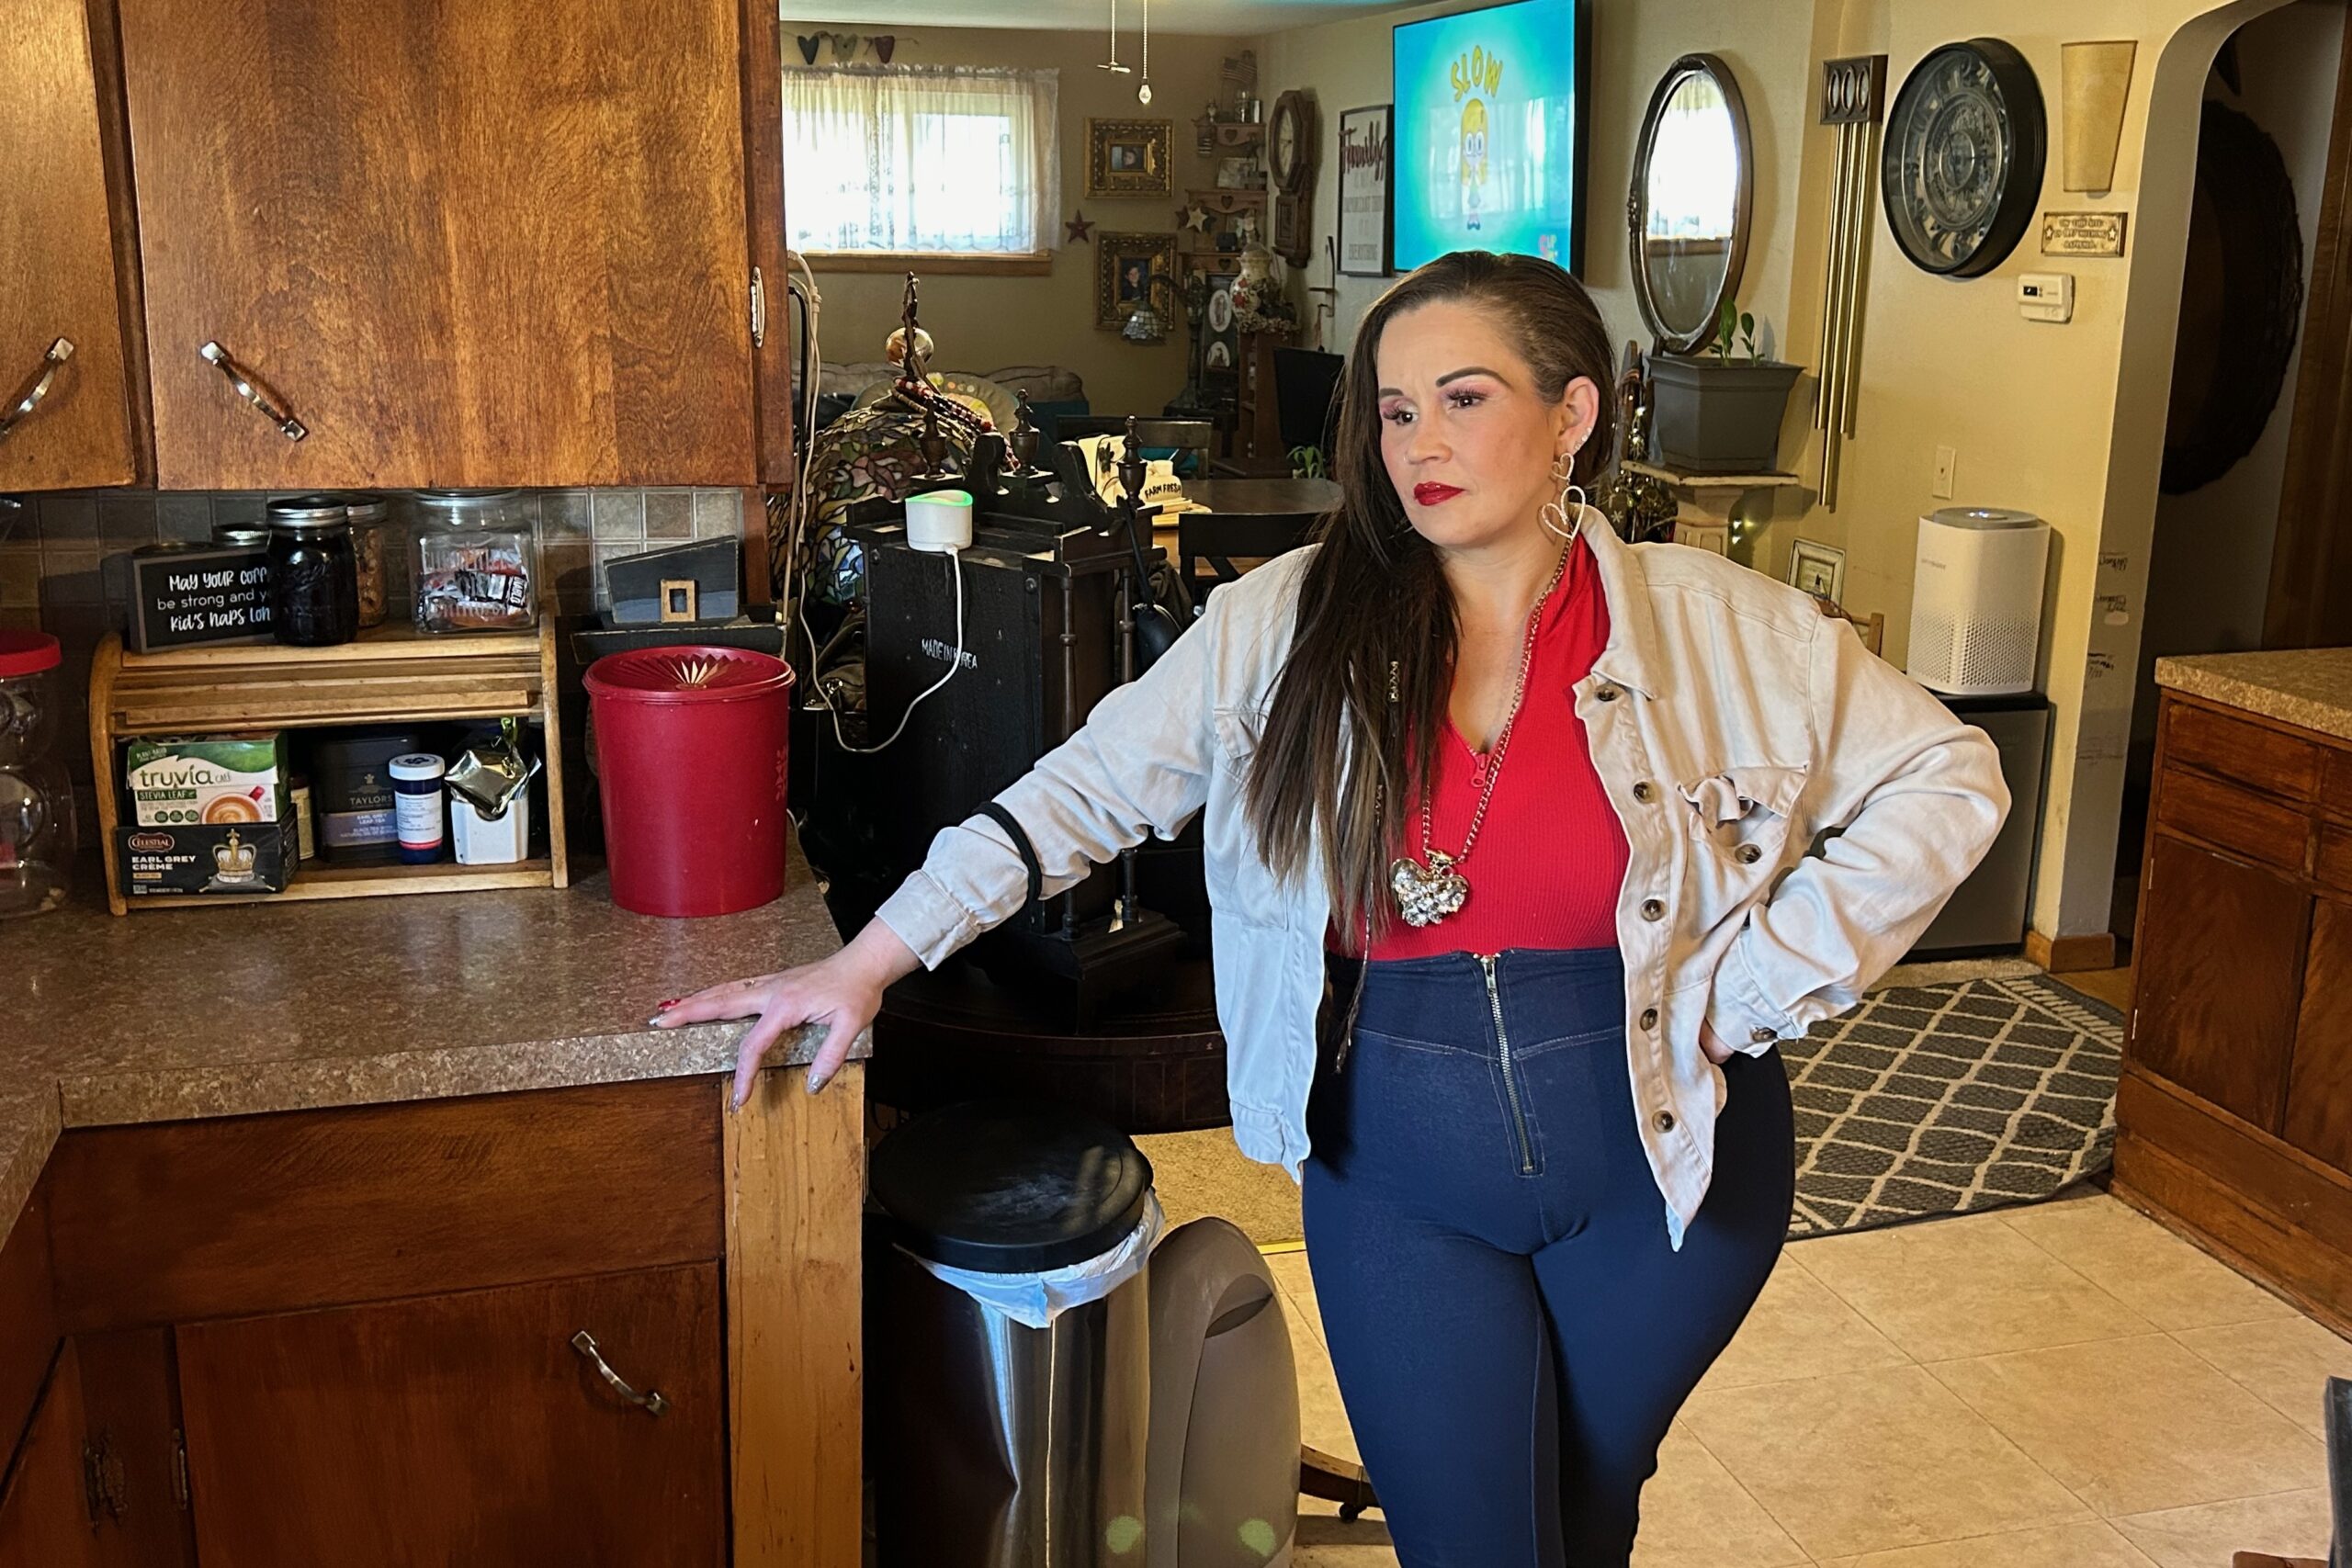 A woman in a red shirt and tan cardigan and jeans stands in her kitchen.